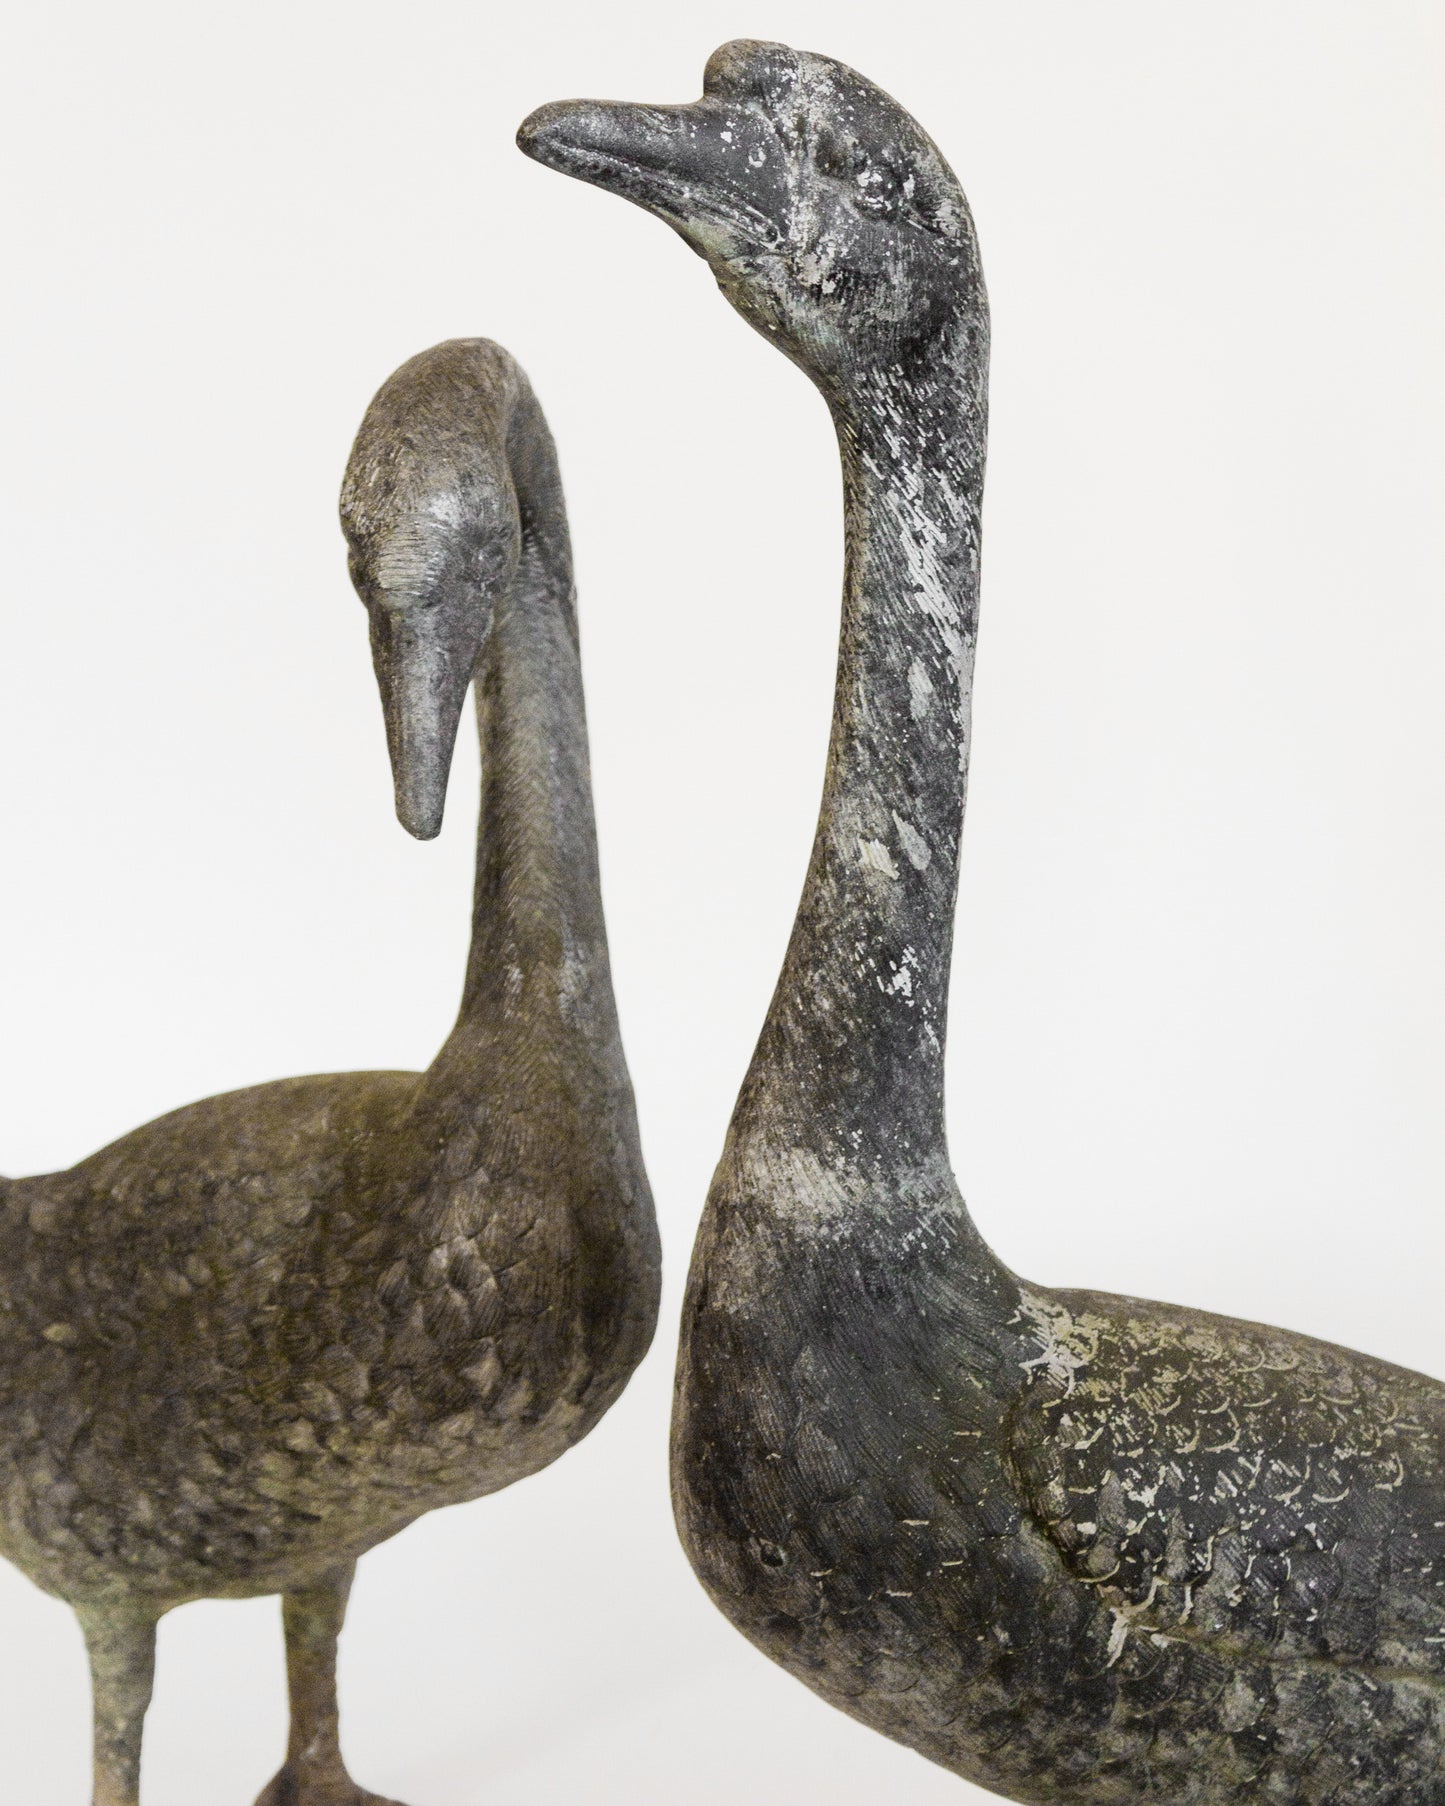 Pair of Geese Garden Statues